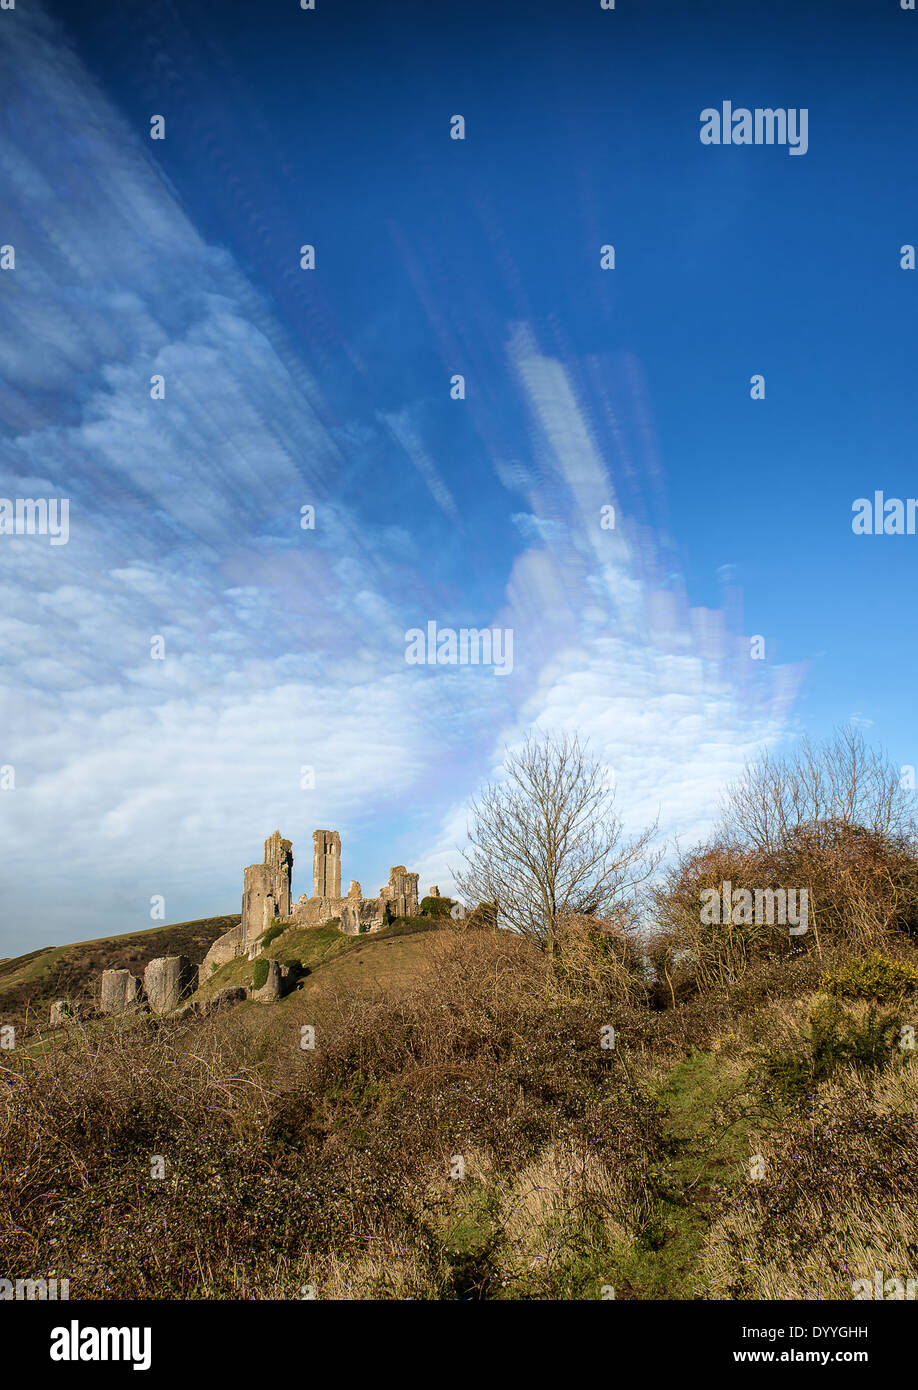 Unique time lapse stack landscape of medieval castle and railway tracks Stock Photo